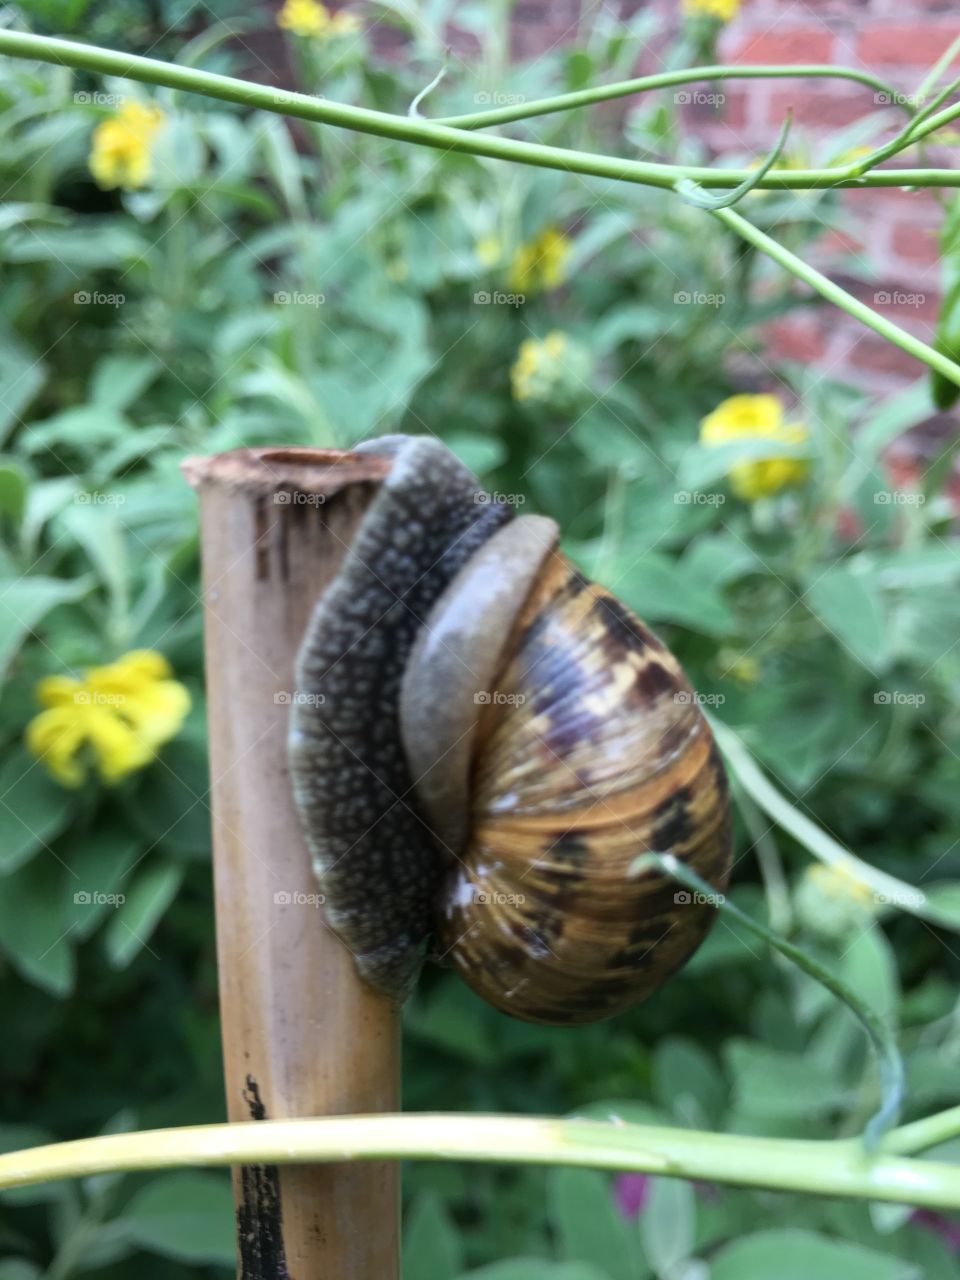 Close up view of a snail crawling up a garden stake stick in the garden with phlomis flowers in the background 